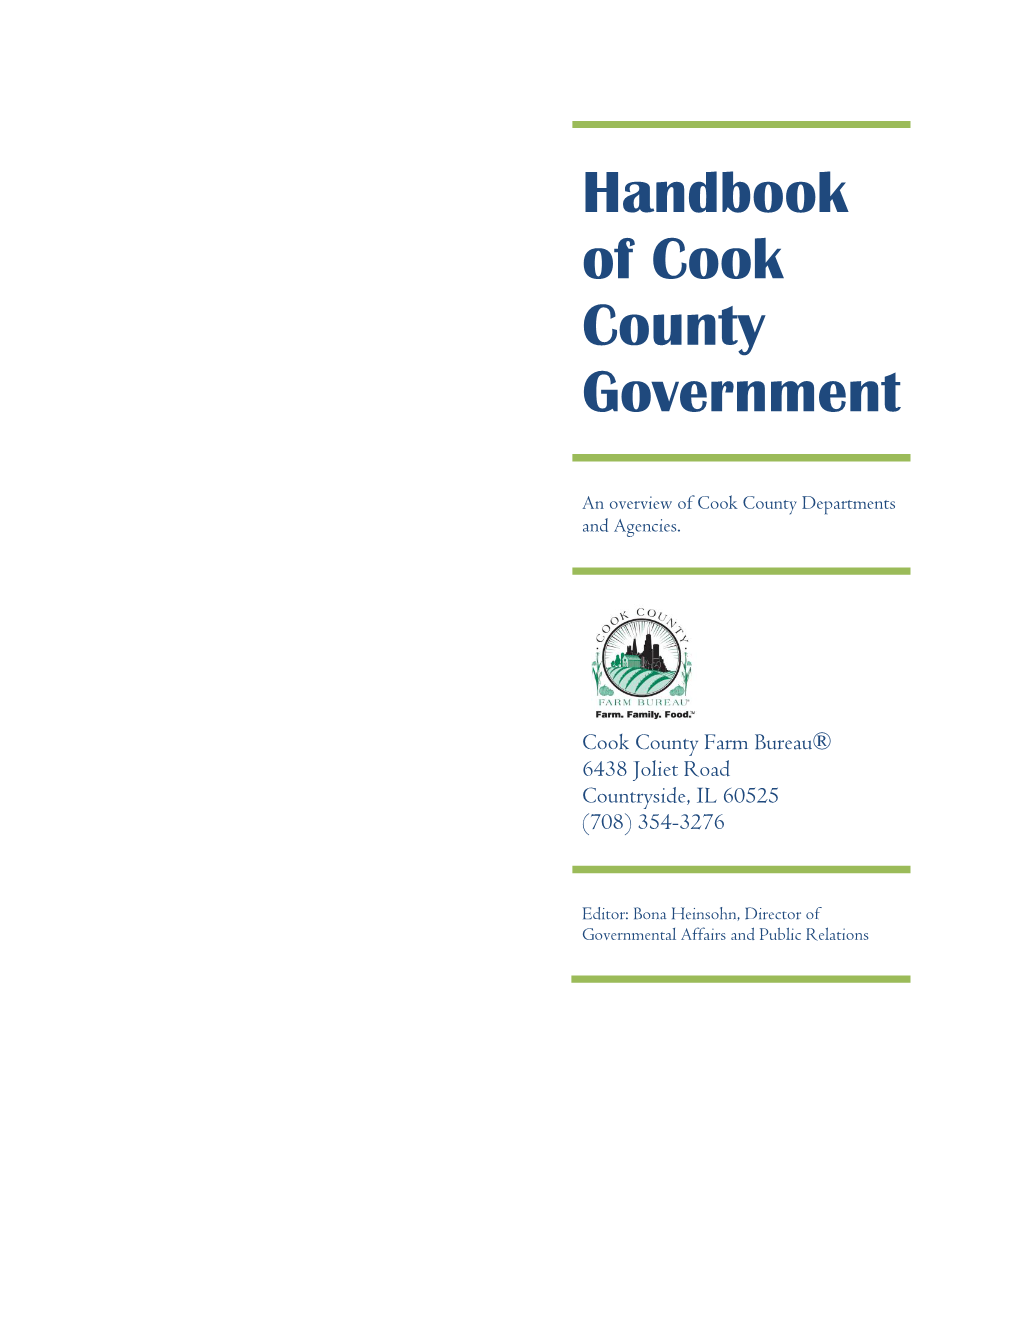 Handbook of Cook County Government